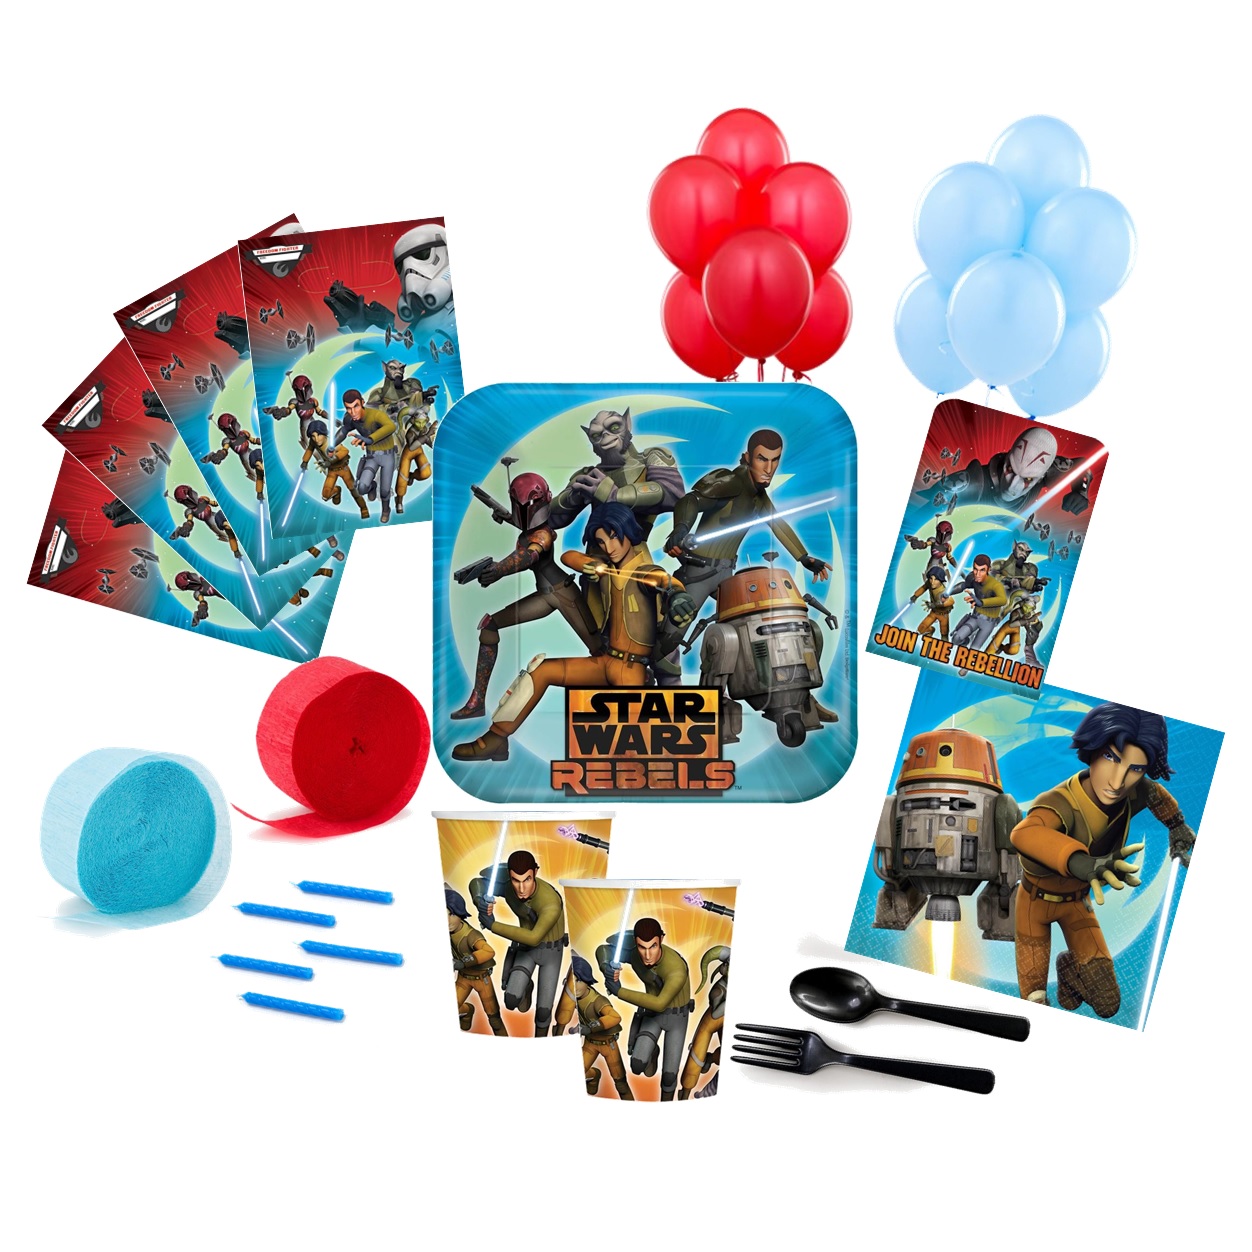 Star Wars Rebels Deluxe Party Pack